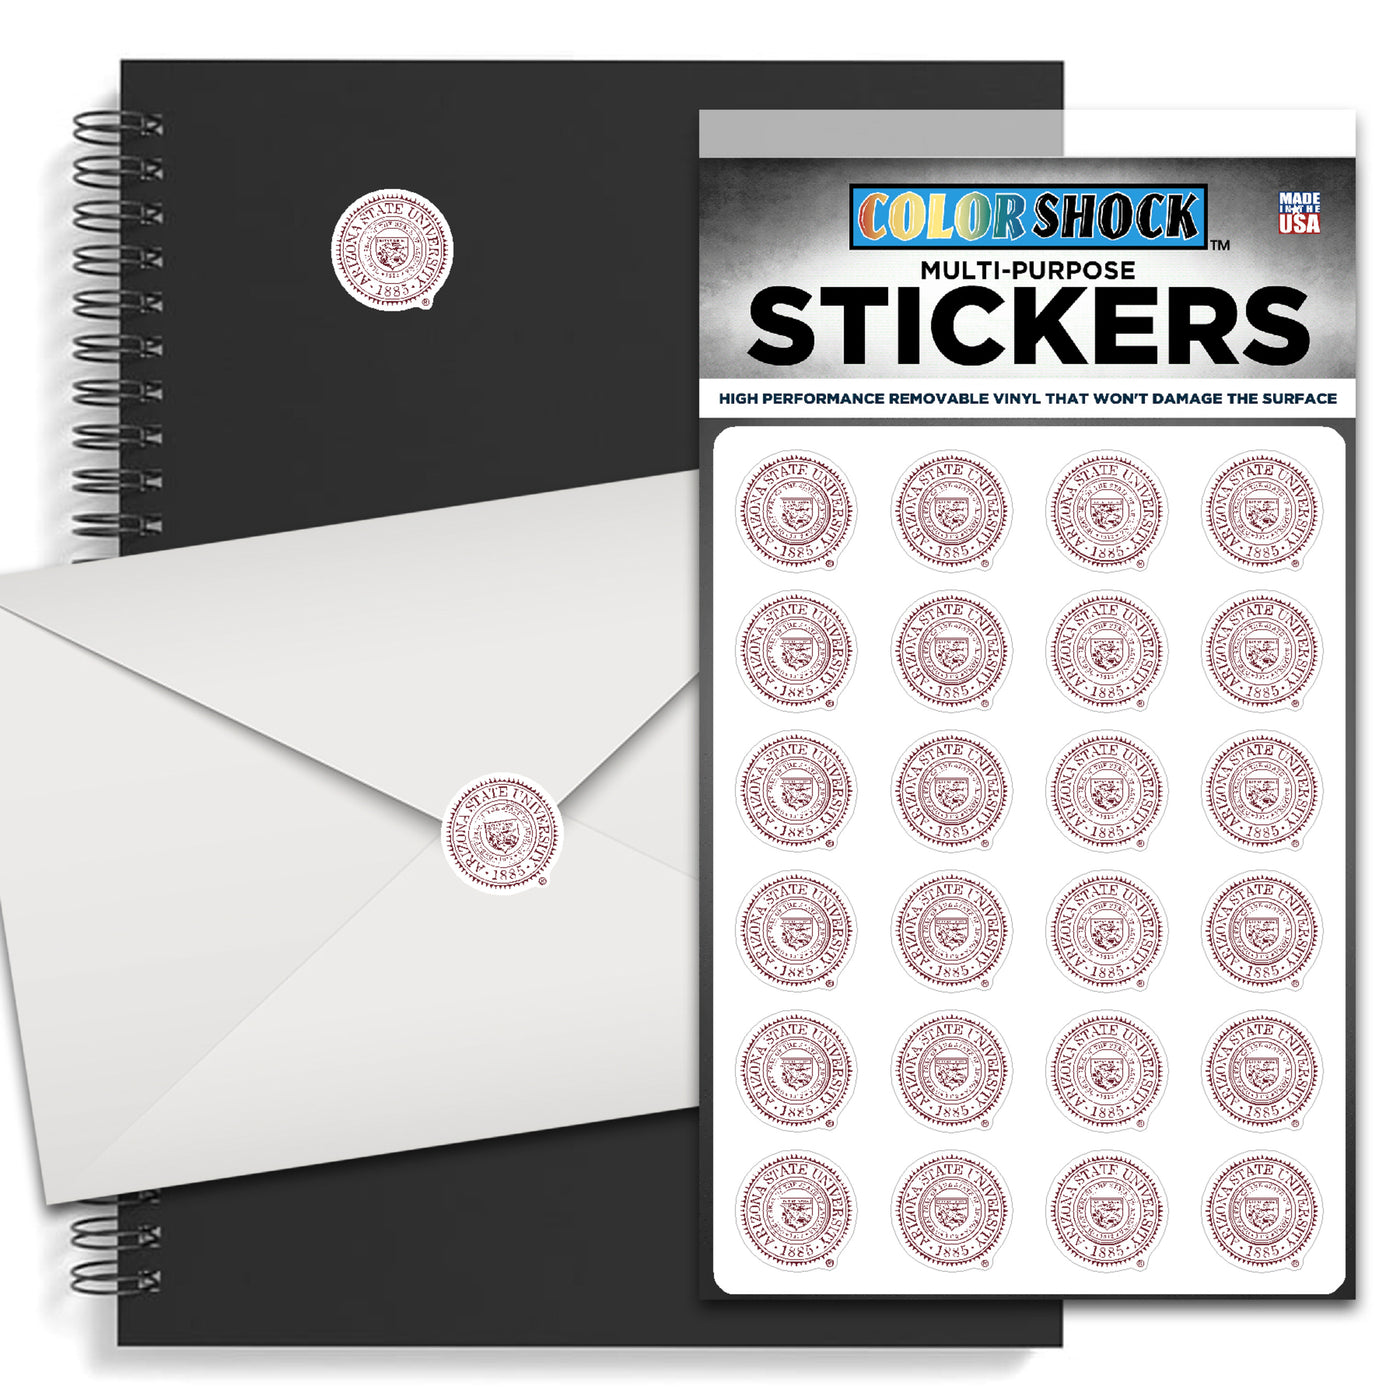 A notebook and a letter each featuring an ASU Seal sticker, as well as packaging with 24 ASU Seal Stickers.